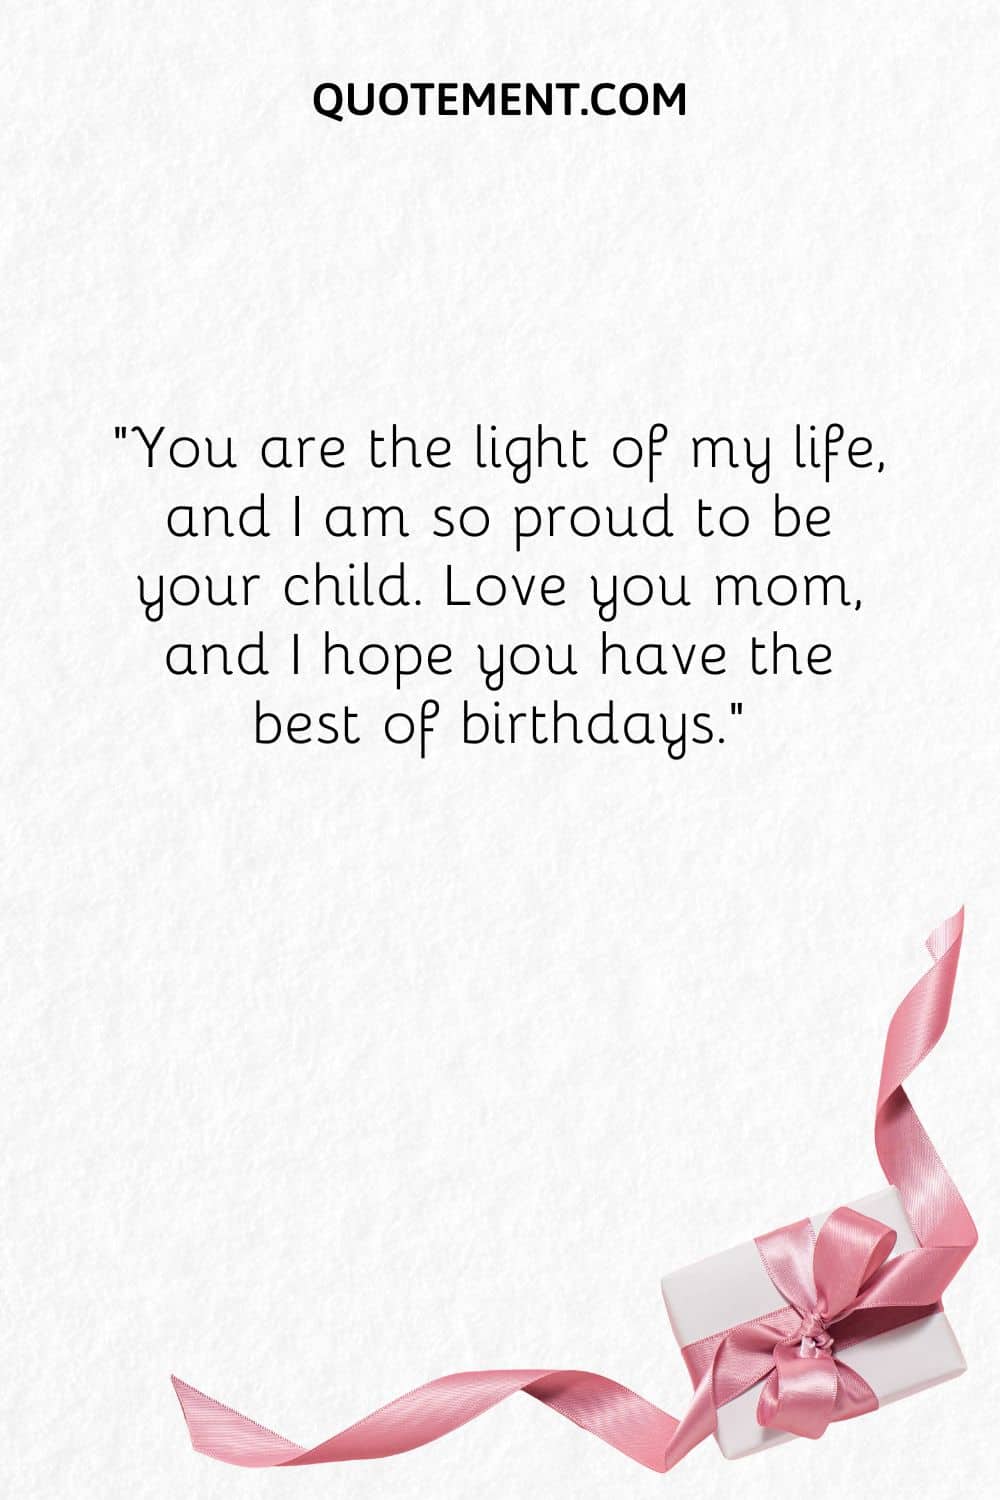 You are the light of my life, and I am so proud to be your child. Love you mom, and I hope you have the best of birthdays.